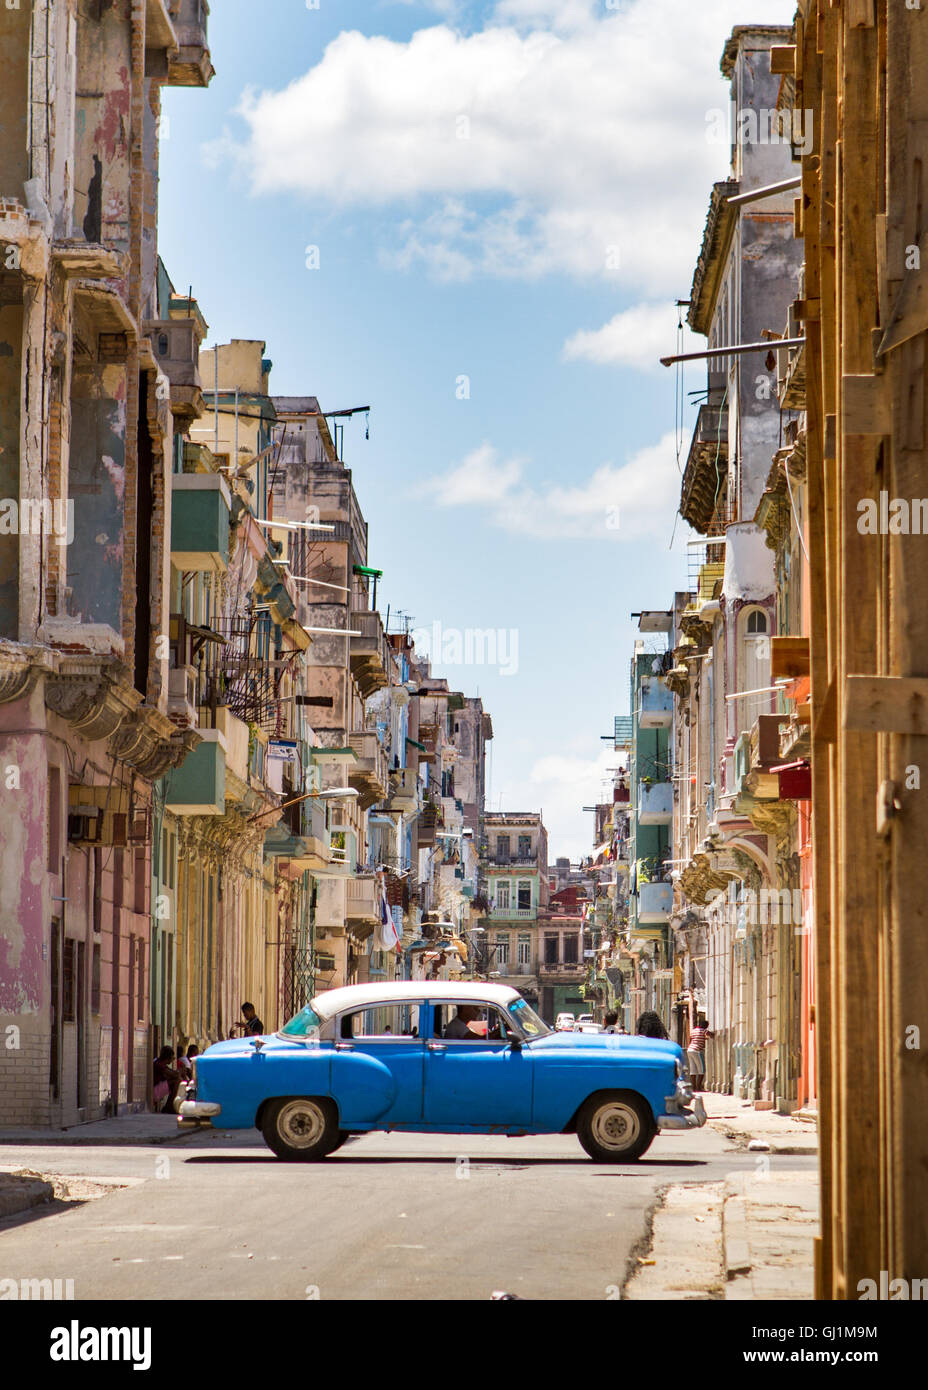 vintage blue car driving on a cross street, in typical colonial, dilapidated street on a sunny day, Havana, Cuba, 2013 Stock Photo